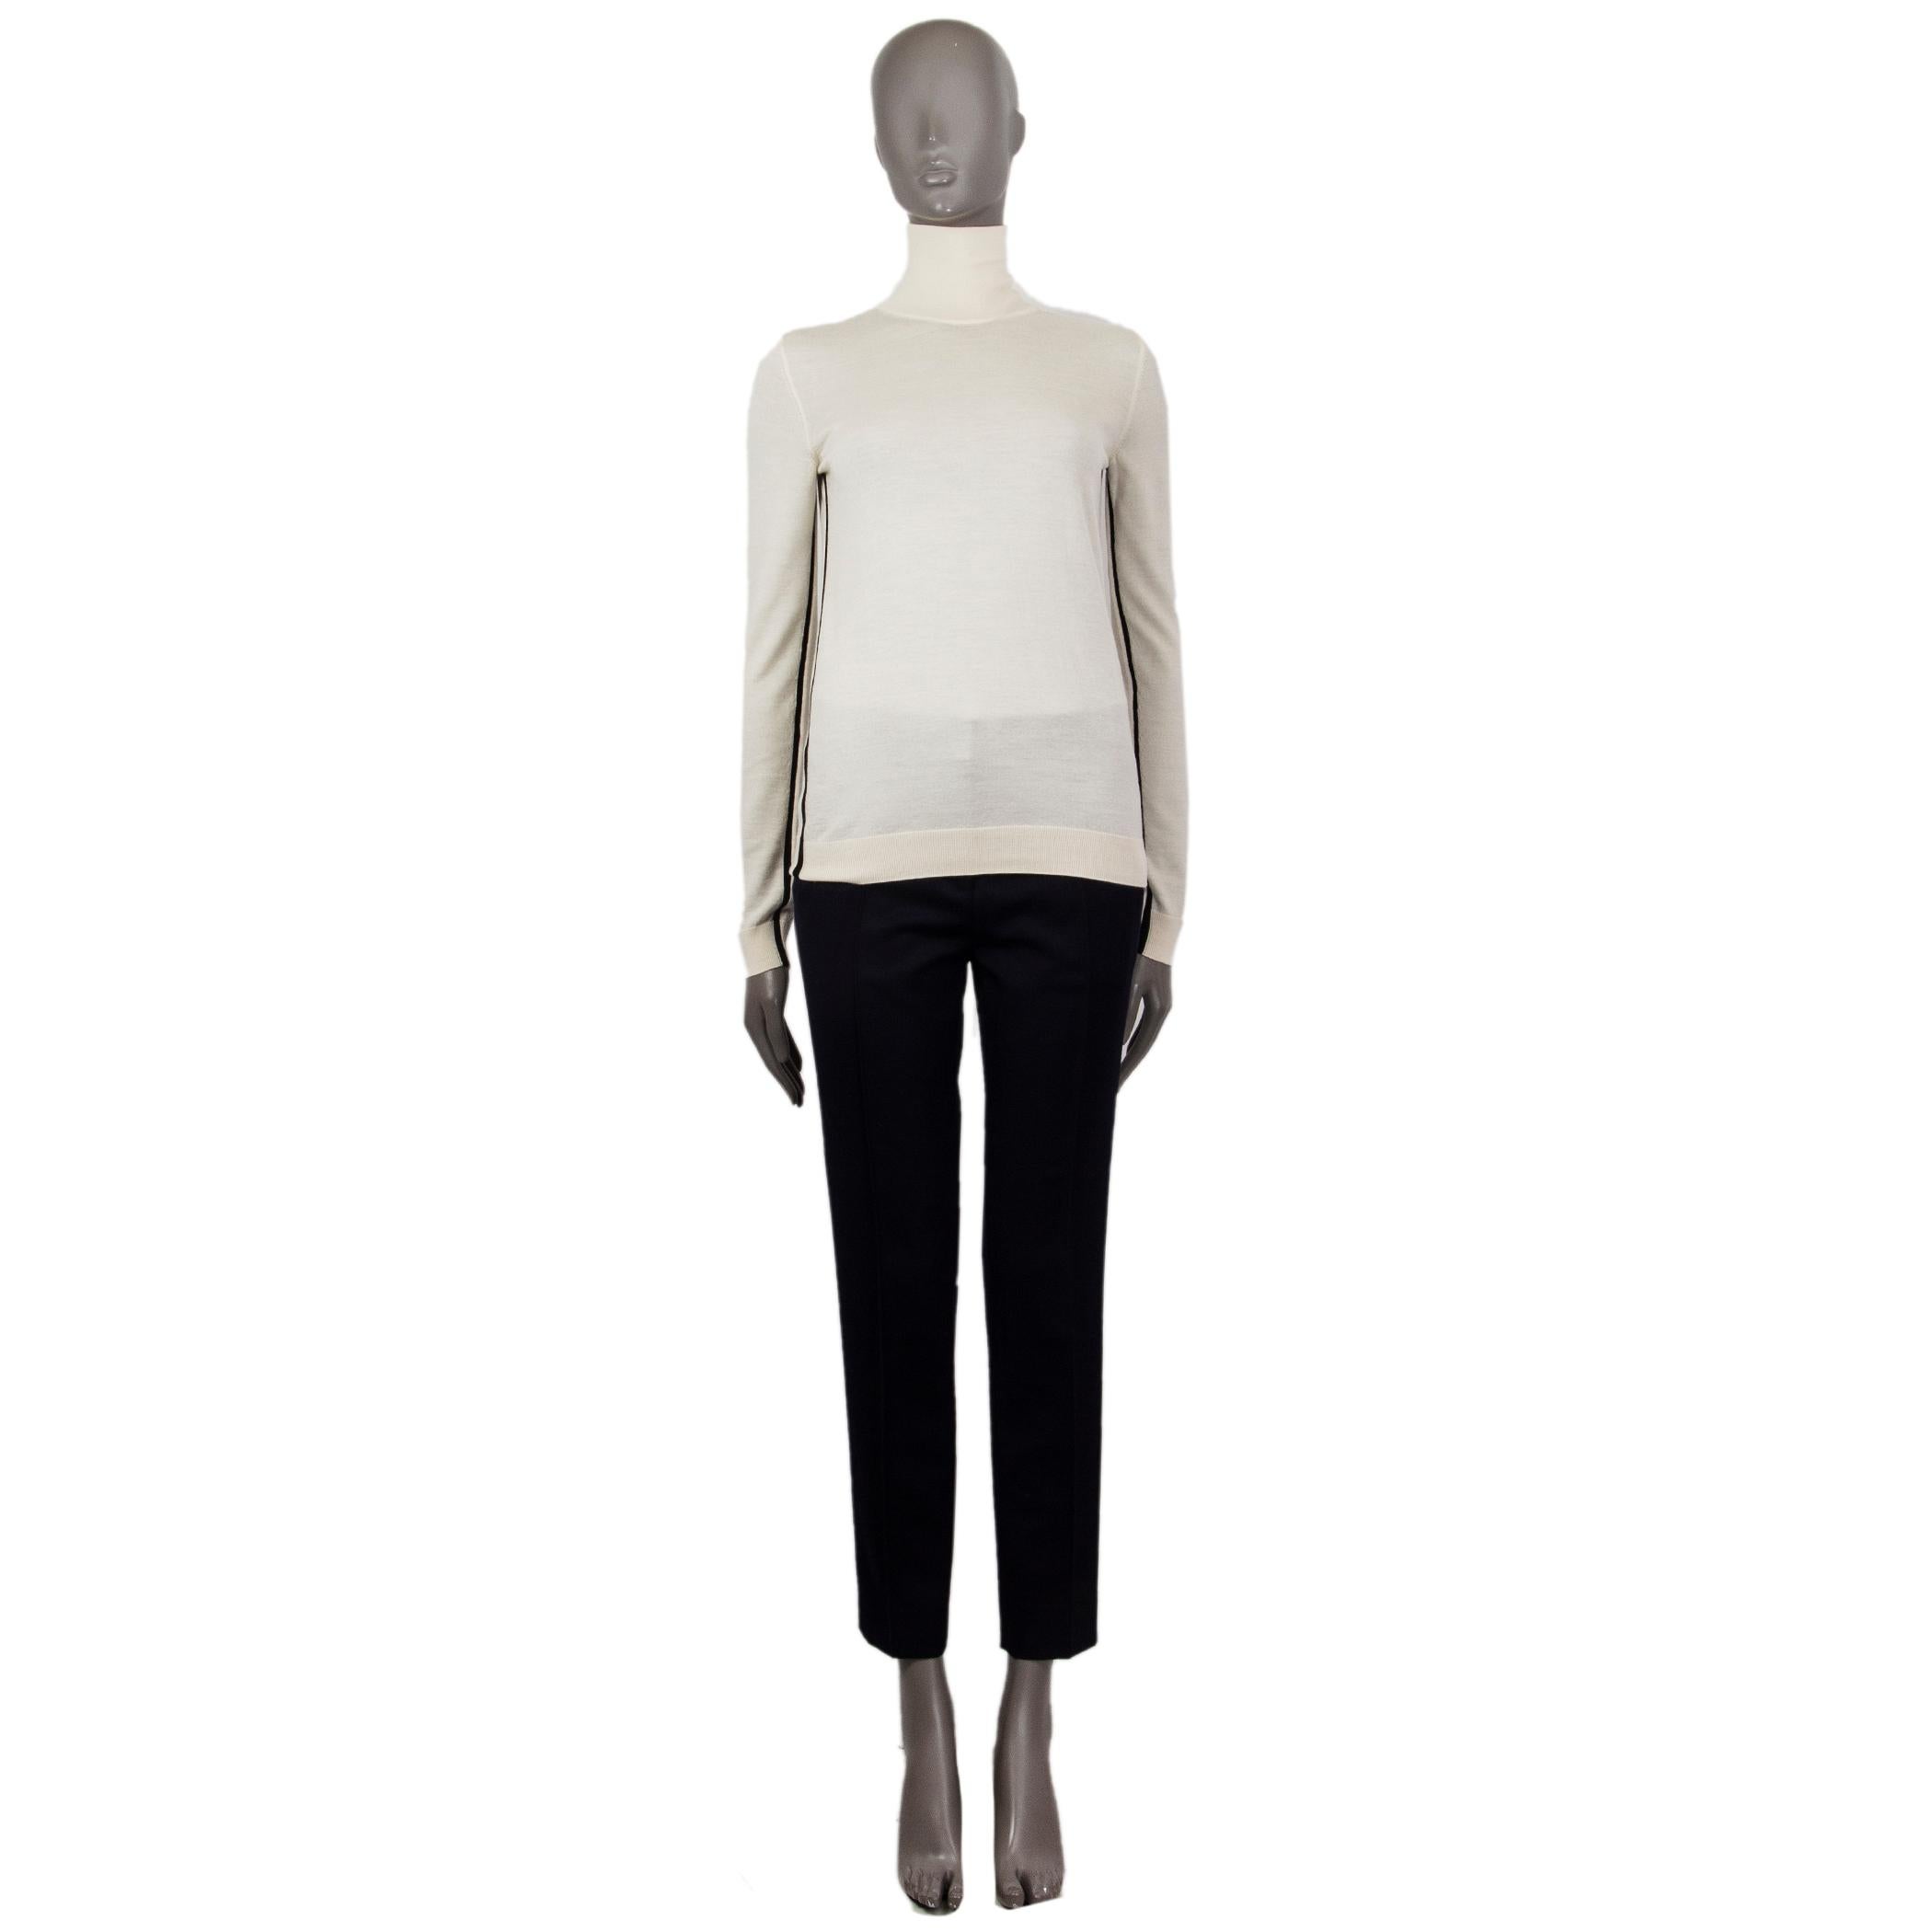 100% authentic Lanvin light turtleneck in ecru wool (65%) silk (18%) cashmere (9%) with a stand-up collar, detailed with knitted Lanvin logo diagonal along the left side. Has ribbed cuffs and hem. Has been worn and is in excellent